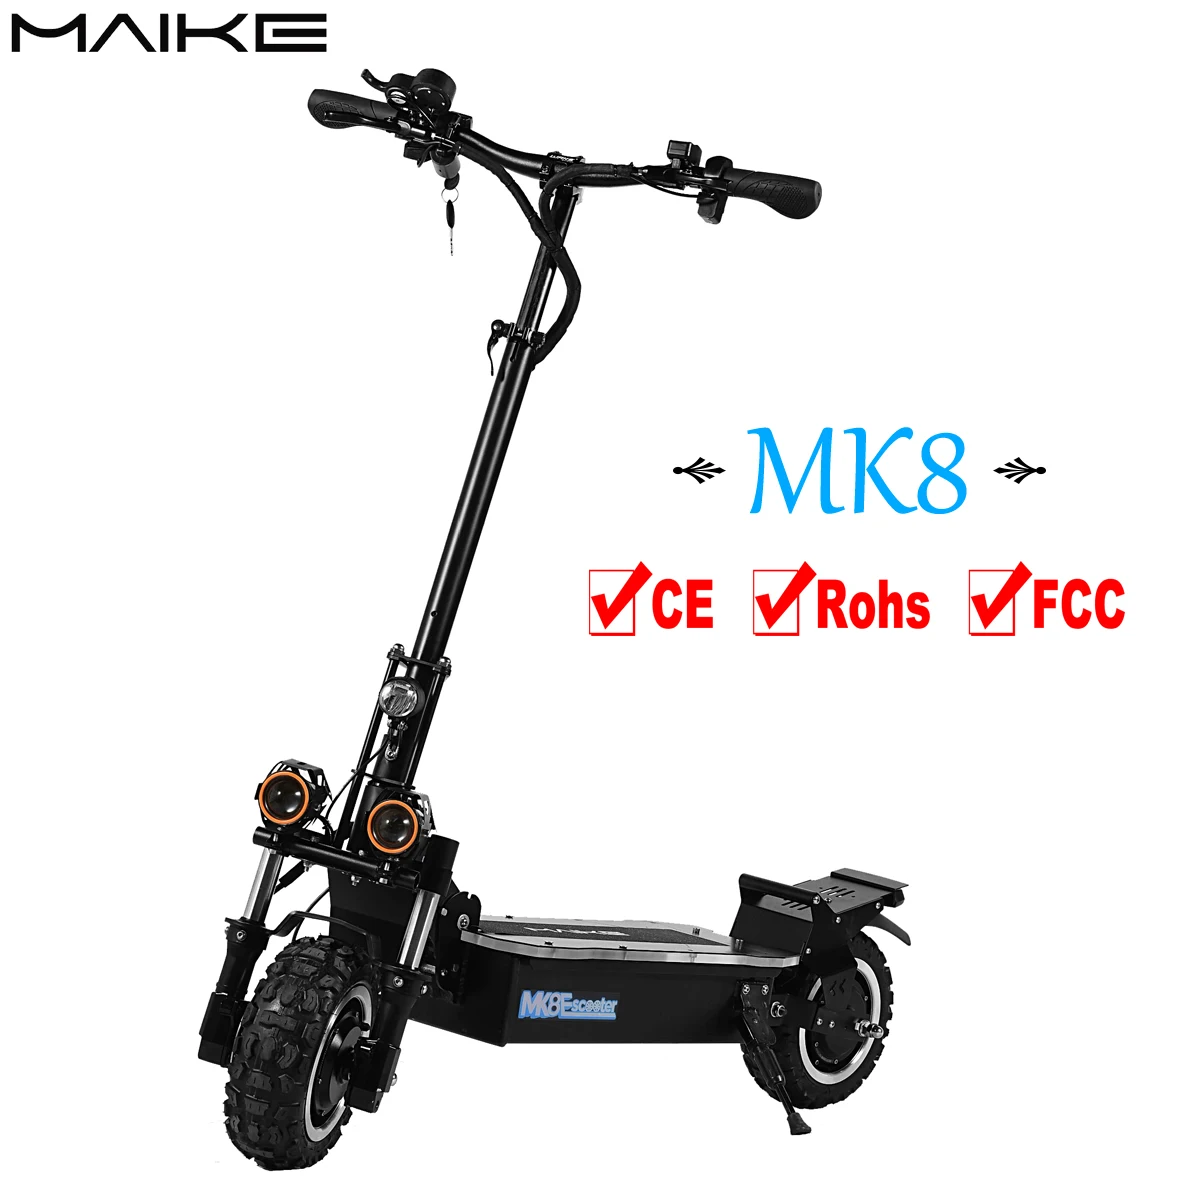 

High Quality Cheap Price maike mk8 11 inch fat tire 3200w dual motor off road electric mobility scooter for adults